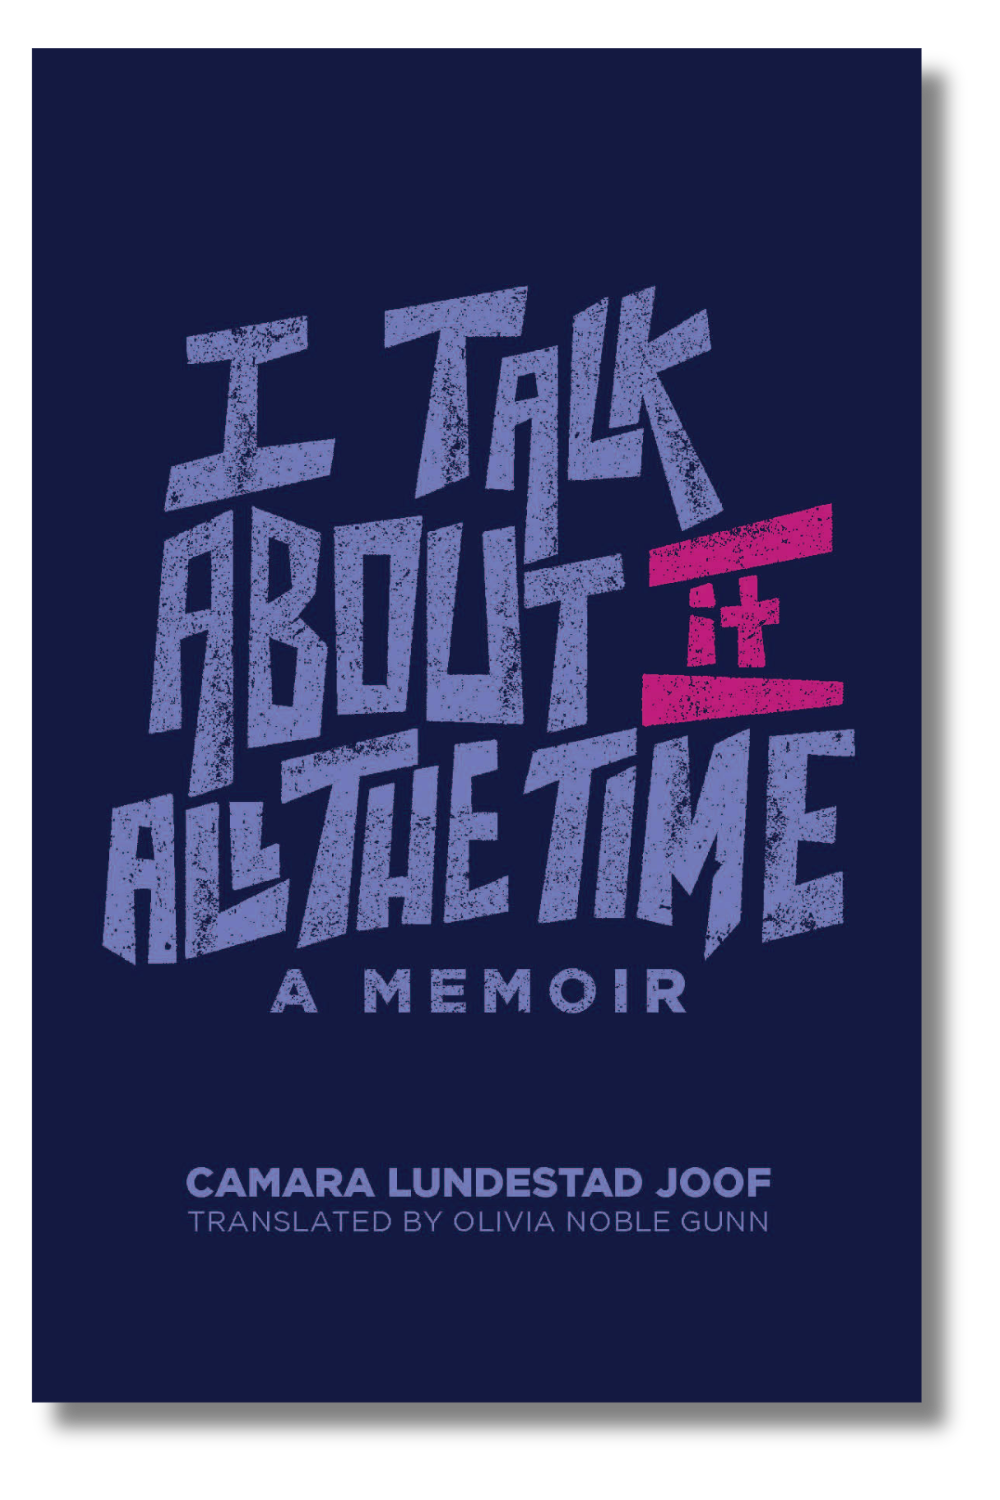 The cover of "I Talk about It All the Time" by Camara Lundestad Joof, tr. by Olivia Noble Gunn